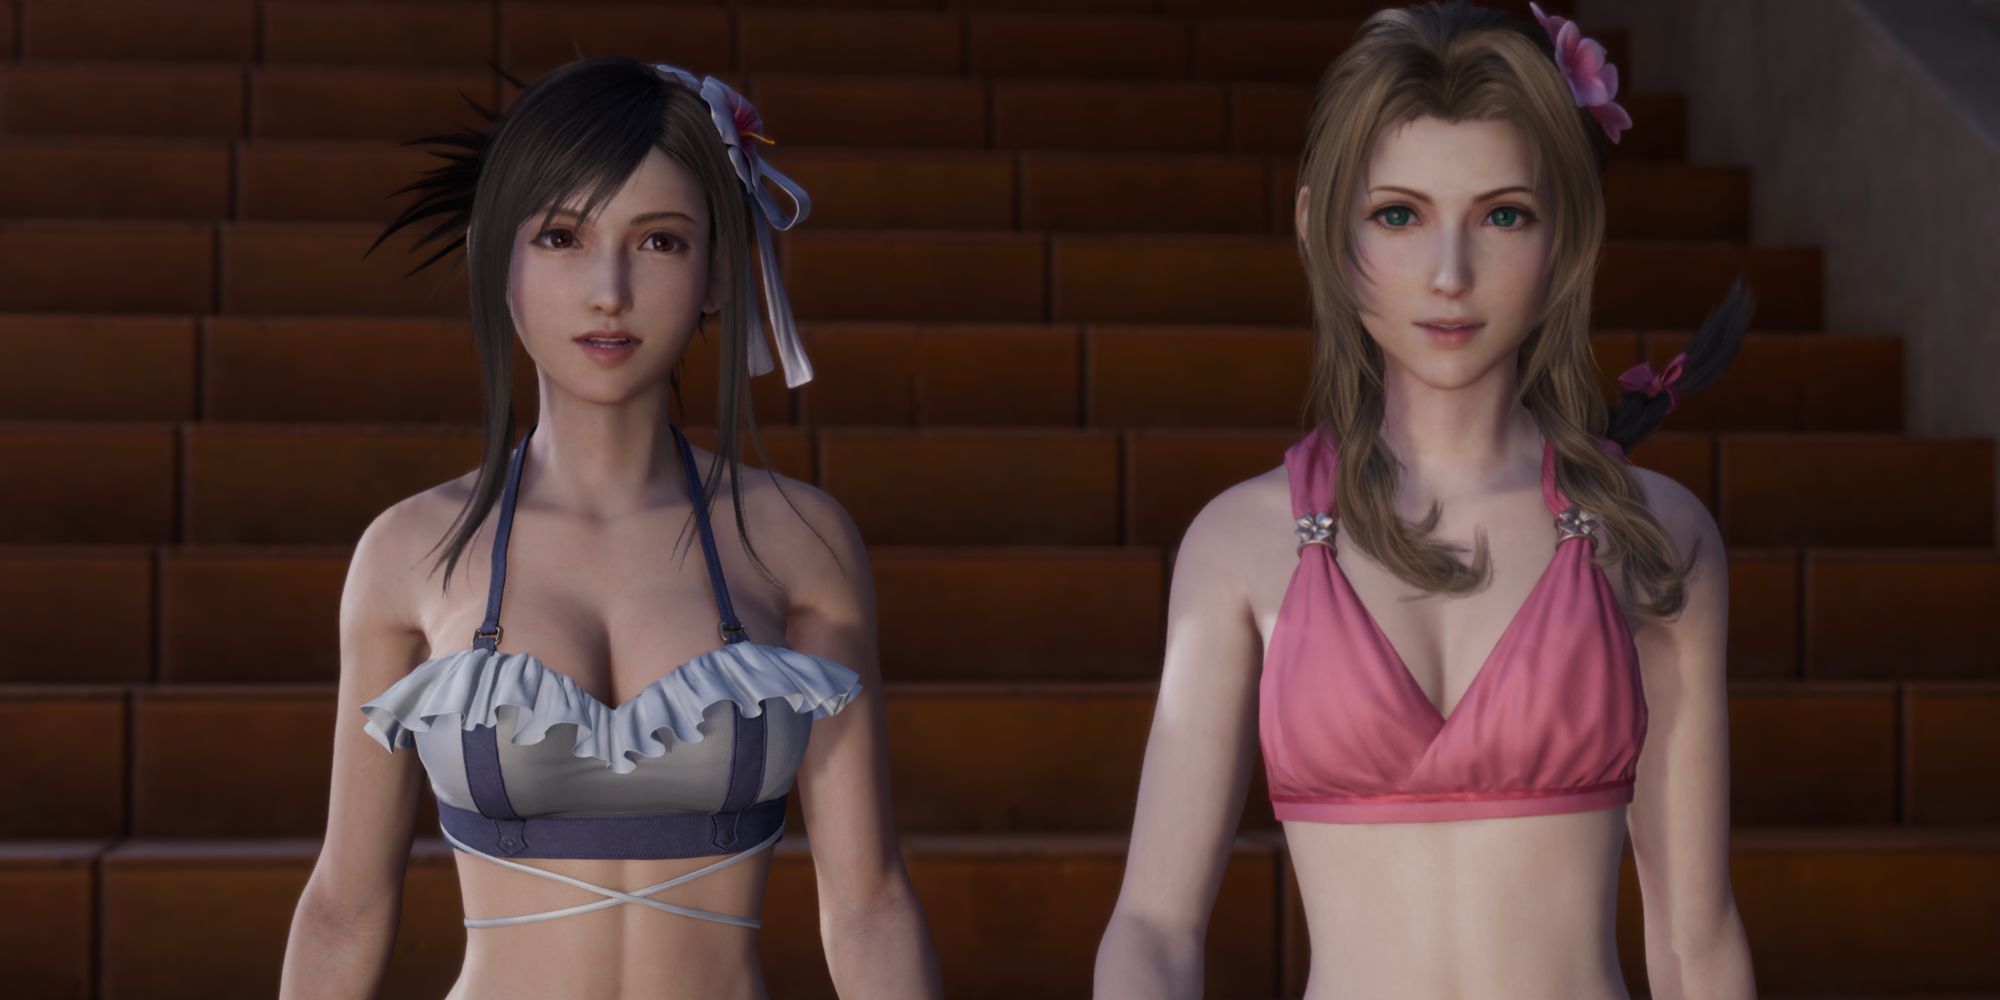 Has anyone else had issues with like a cloud bra sizing? My sonic